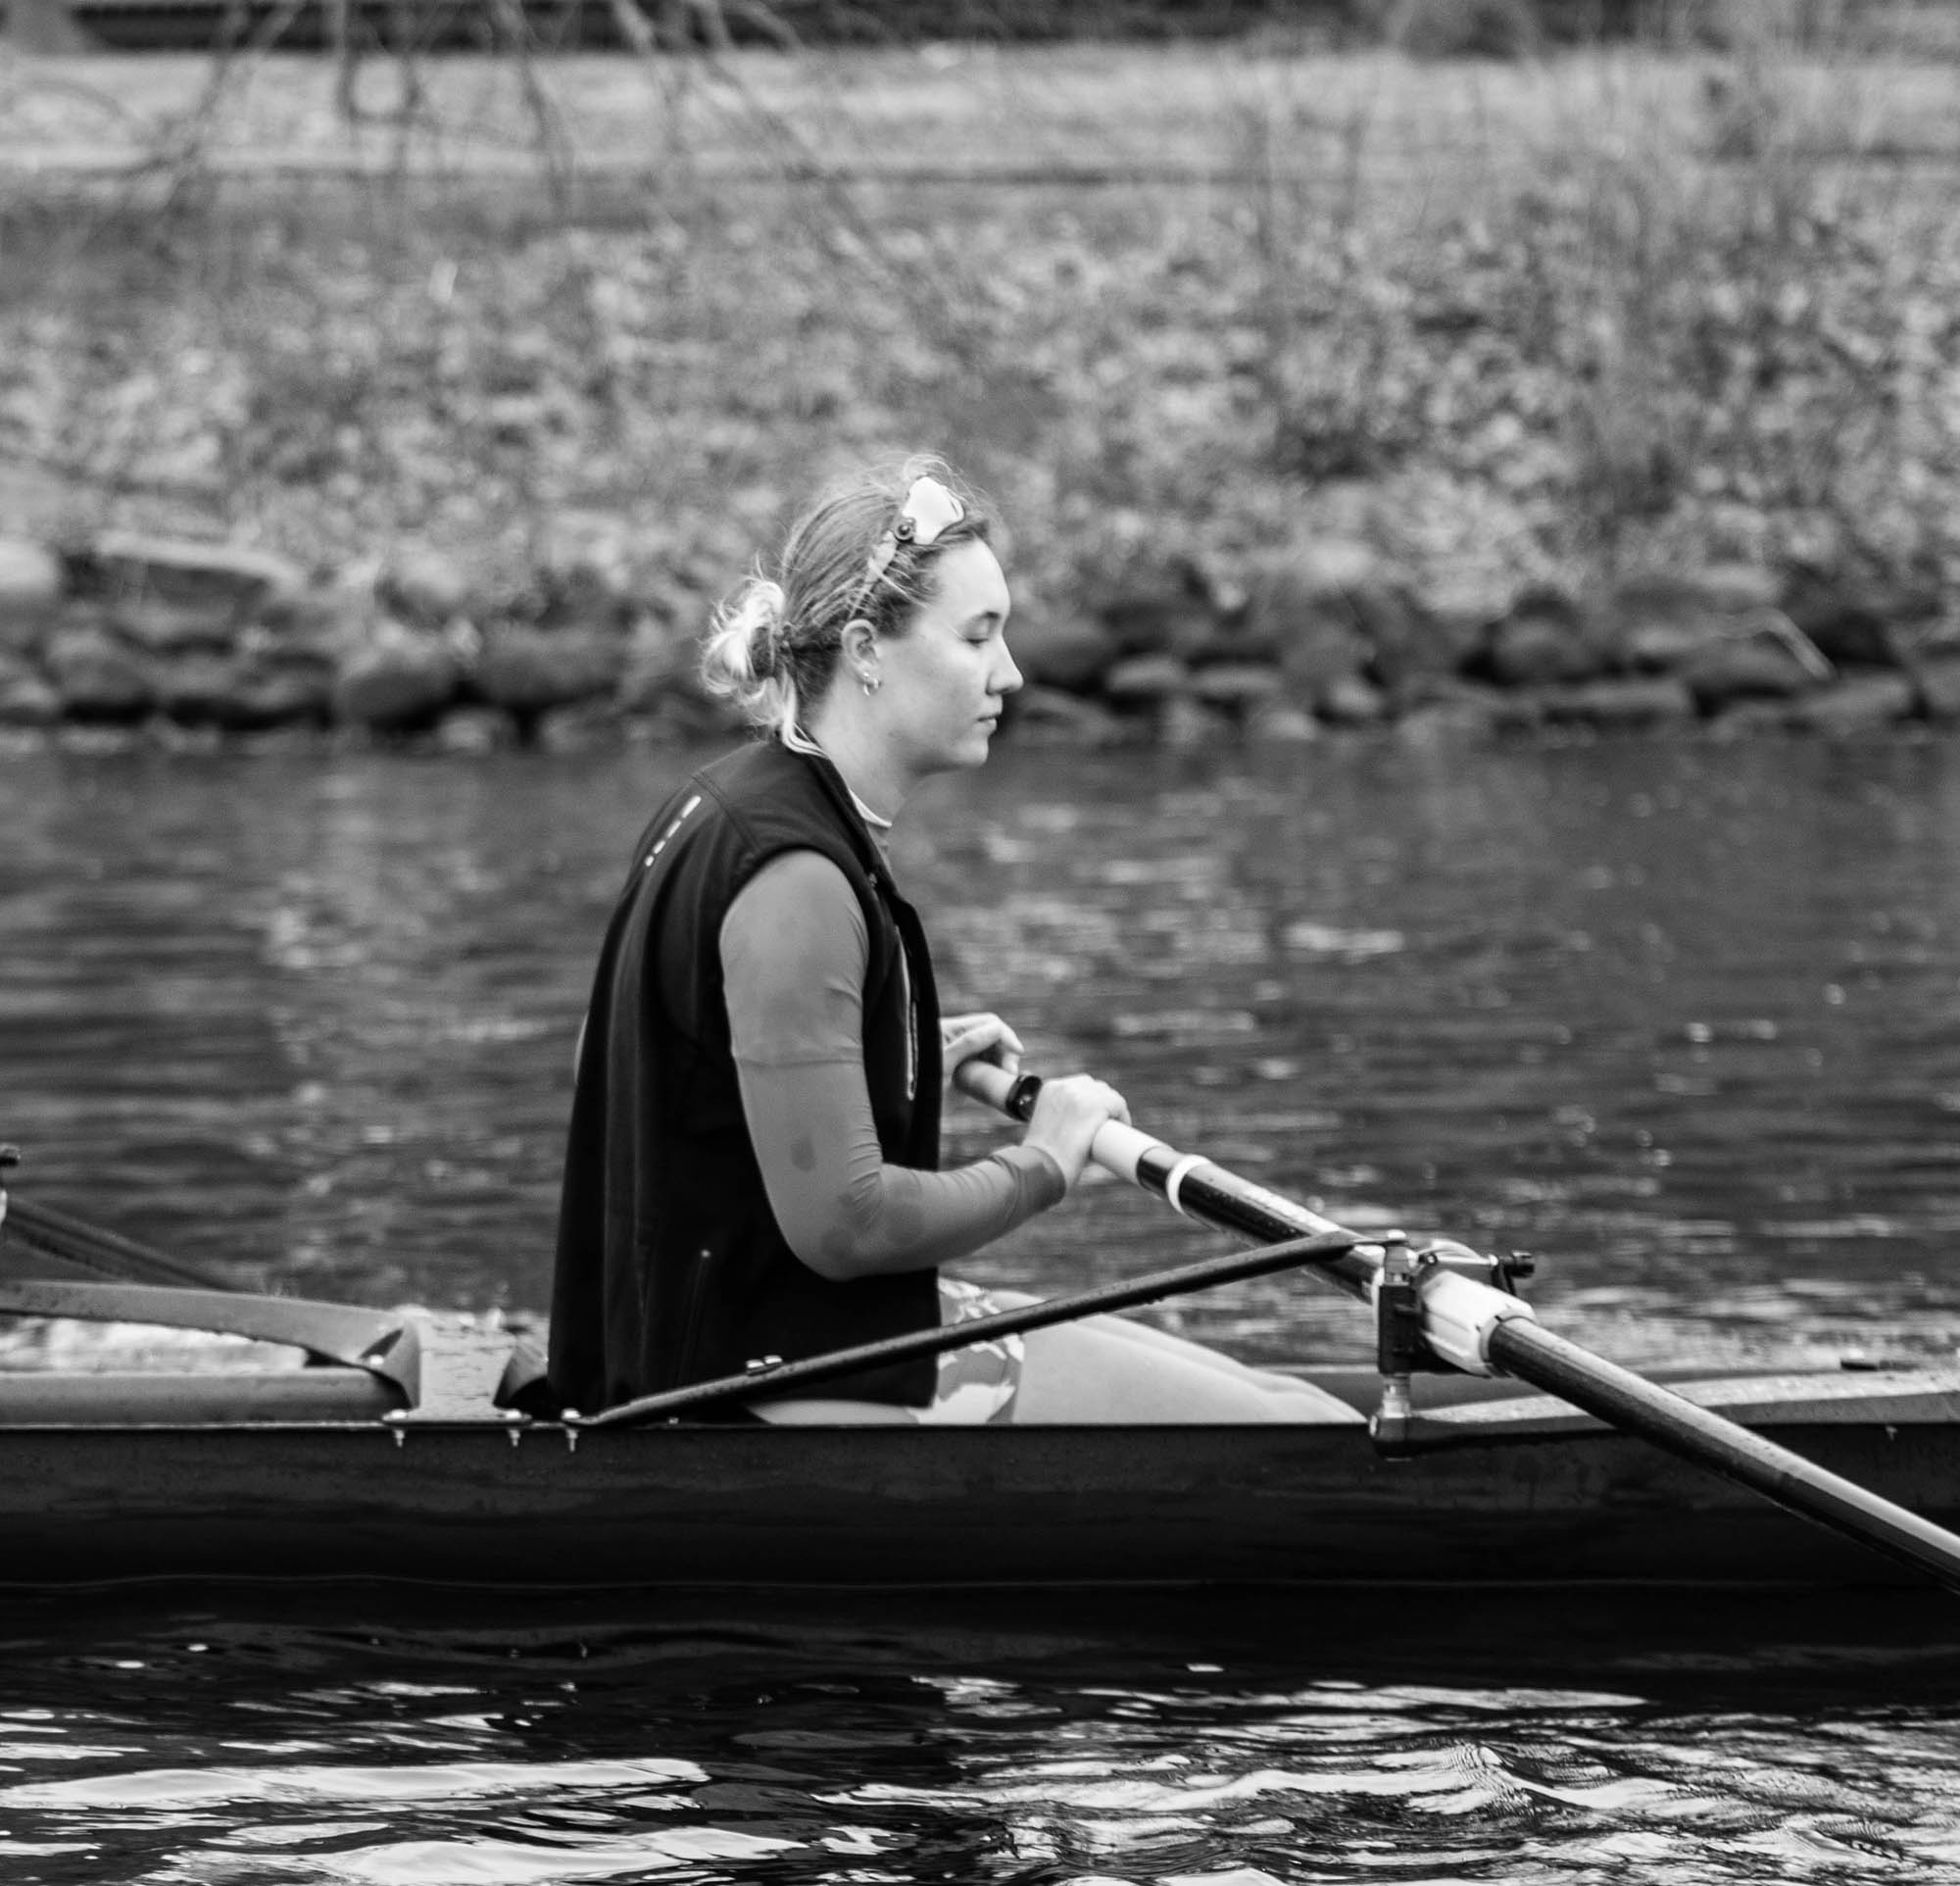 Photo: Black and white photos of Kat Robbins rowing with her team on the water. A young white woman with hair tied back in a bun and wearing a long-sleeved shirt, black vest, and swim shorts, is shown mid-row. 